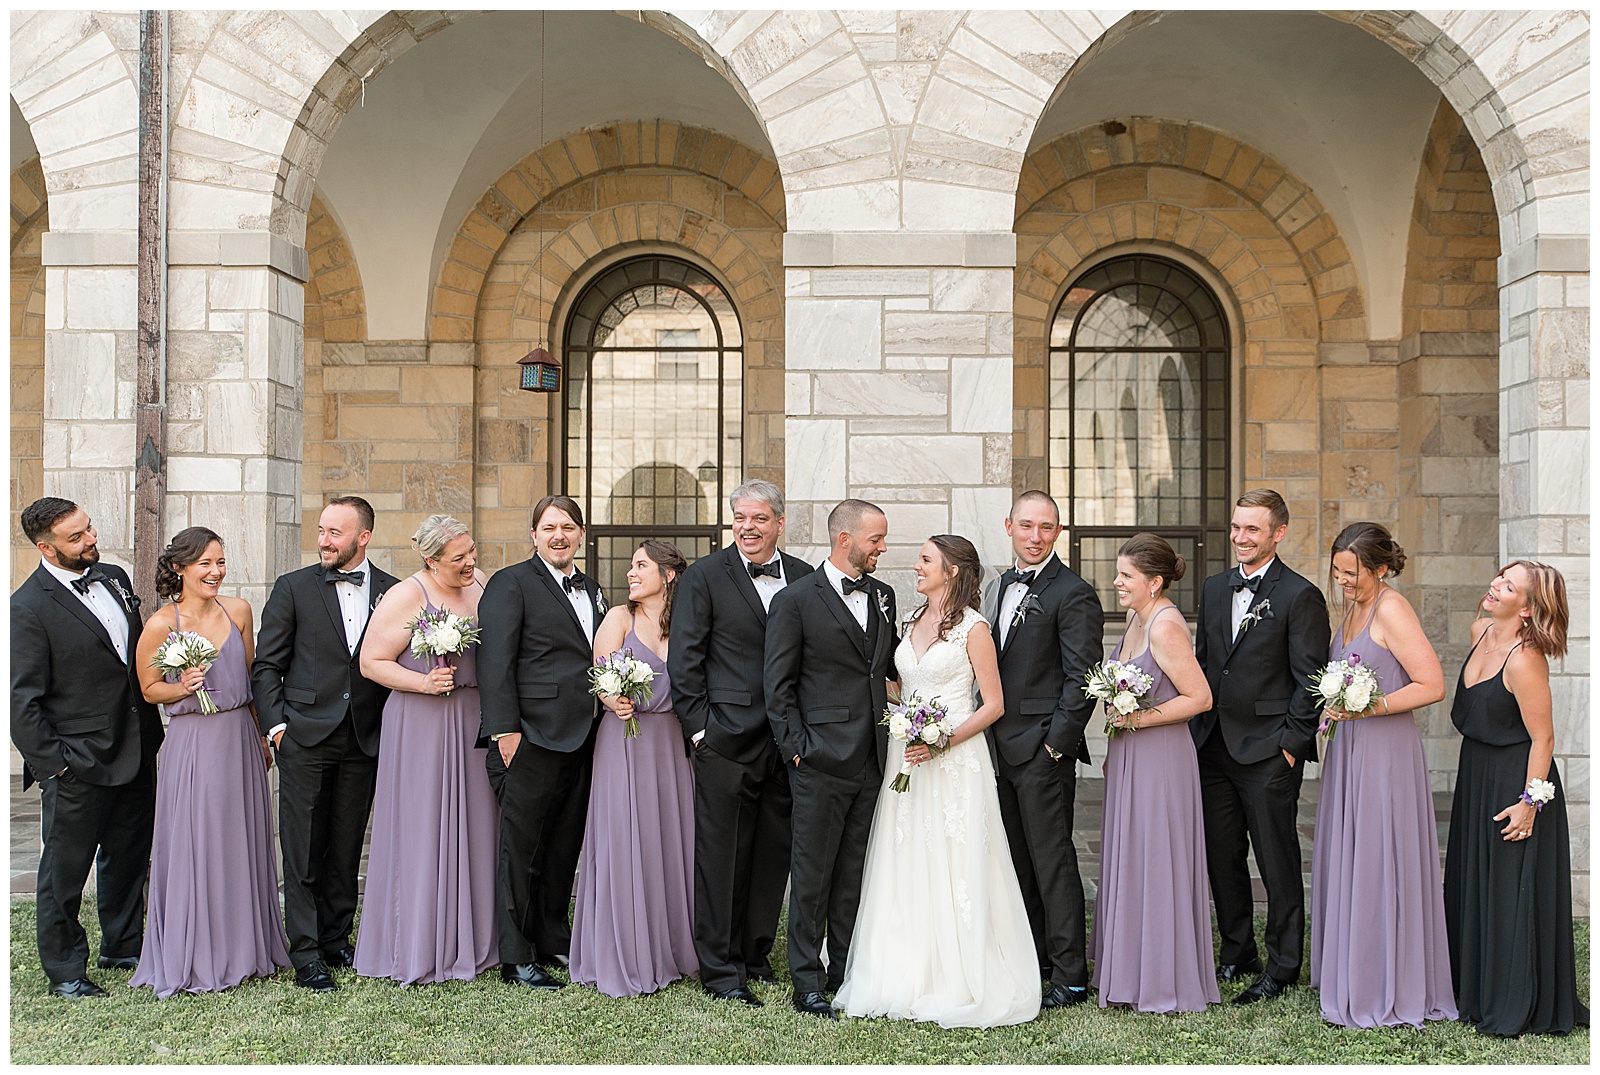 bridal party laughing together in front of stone arches